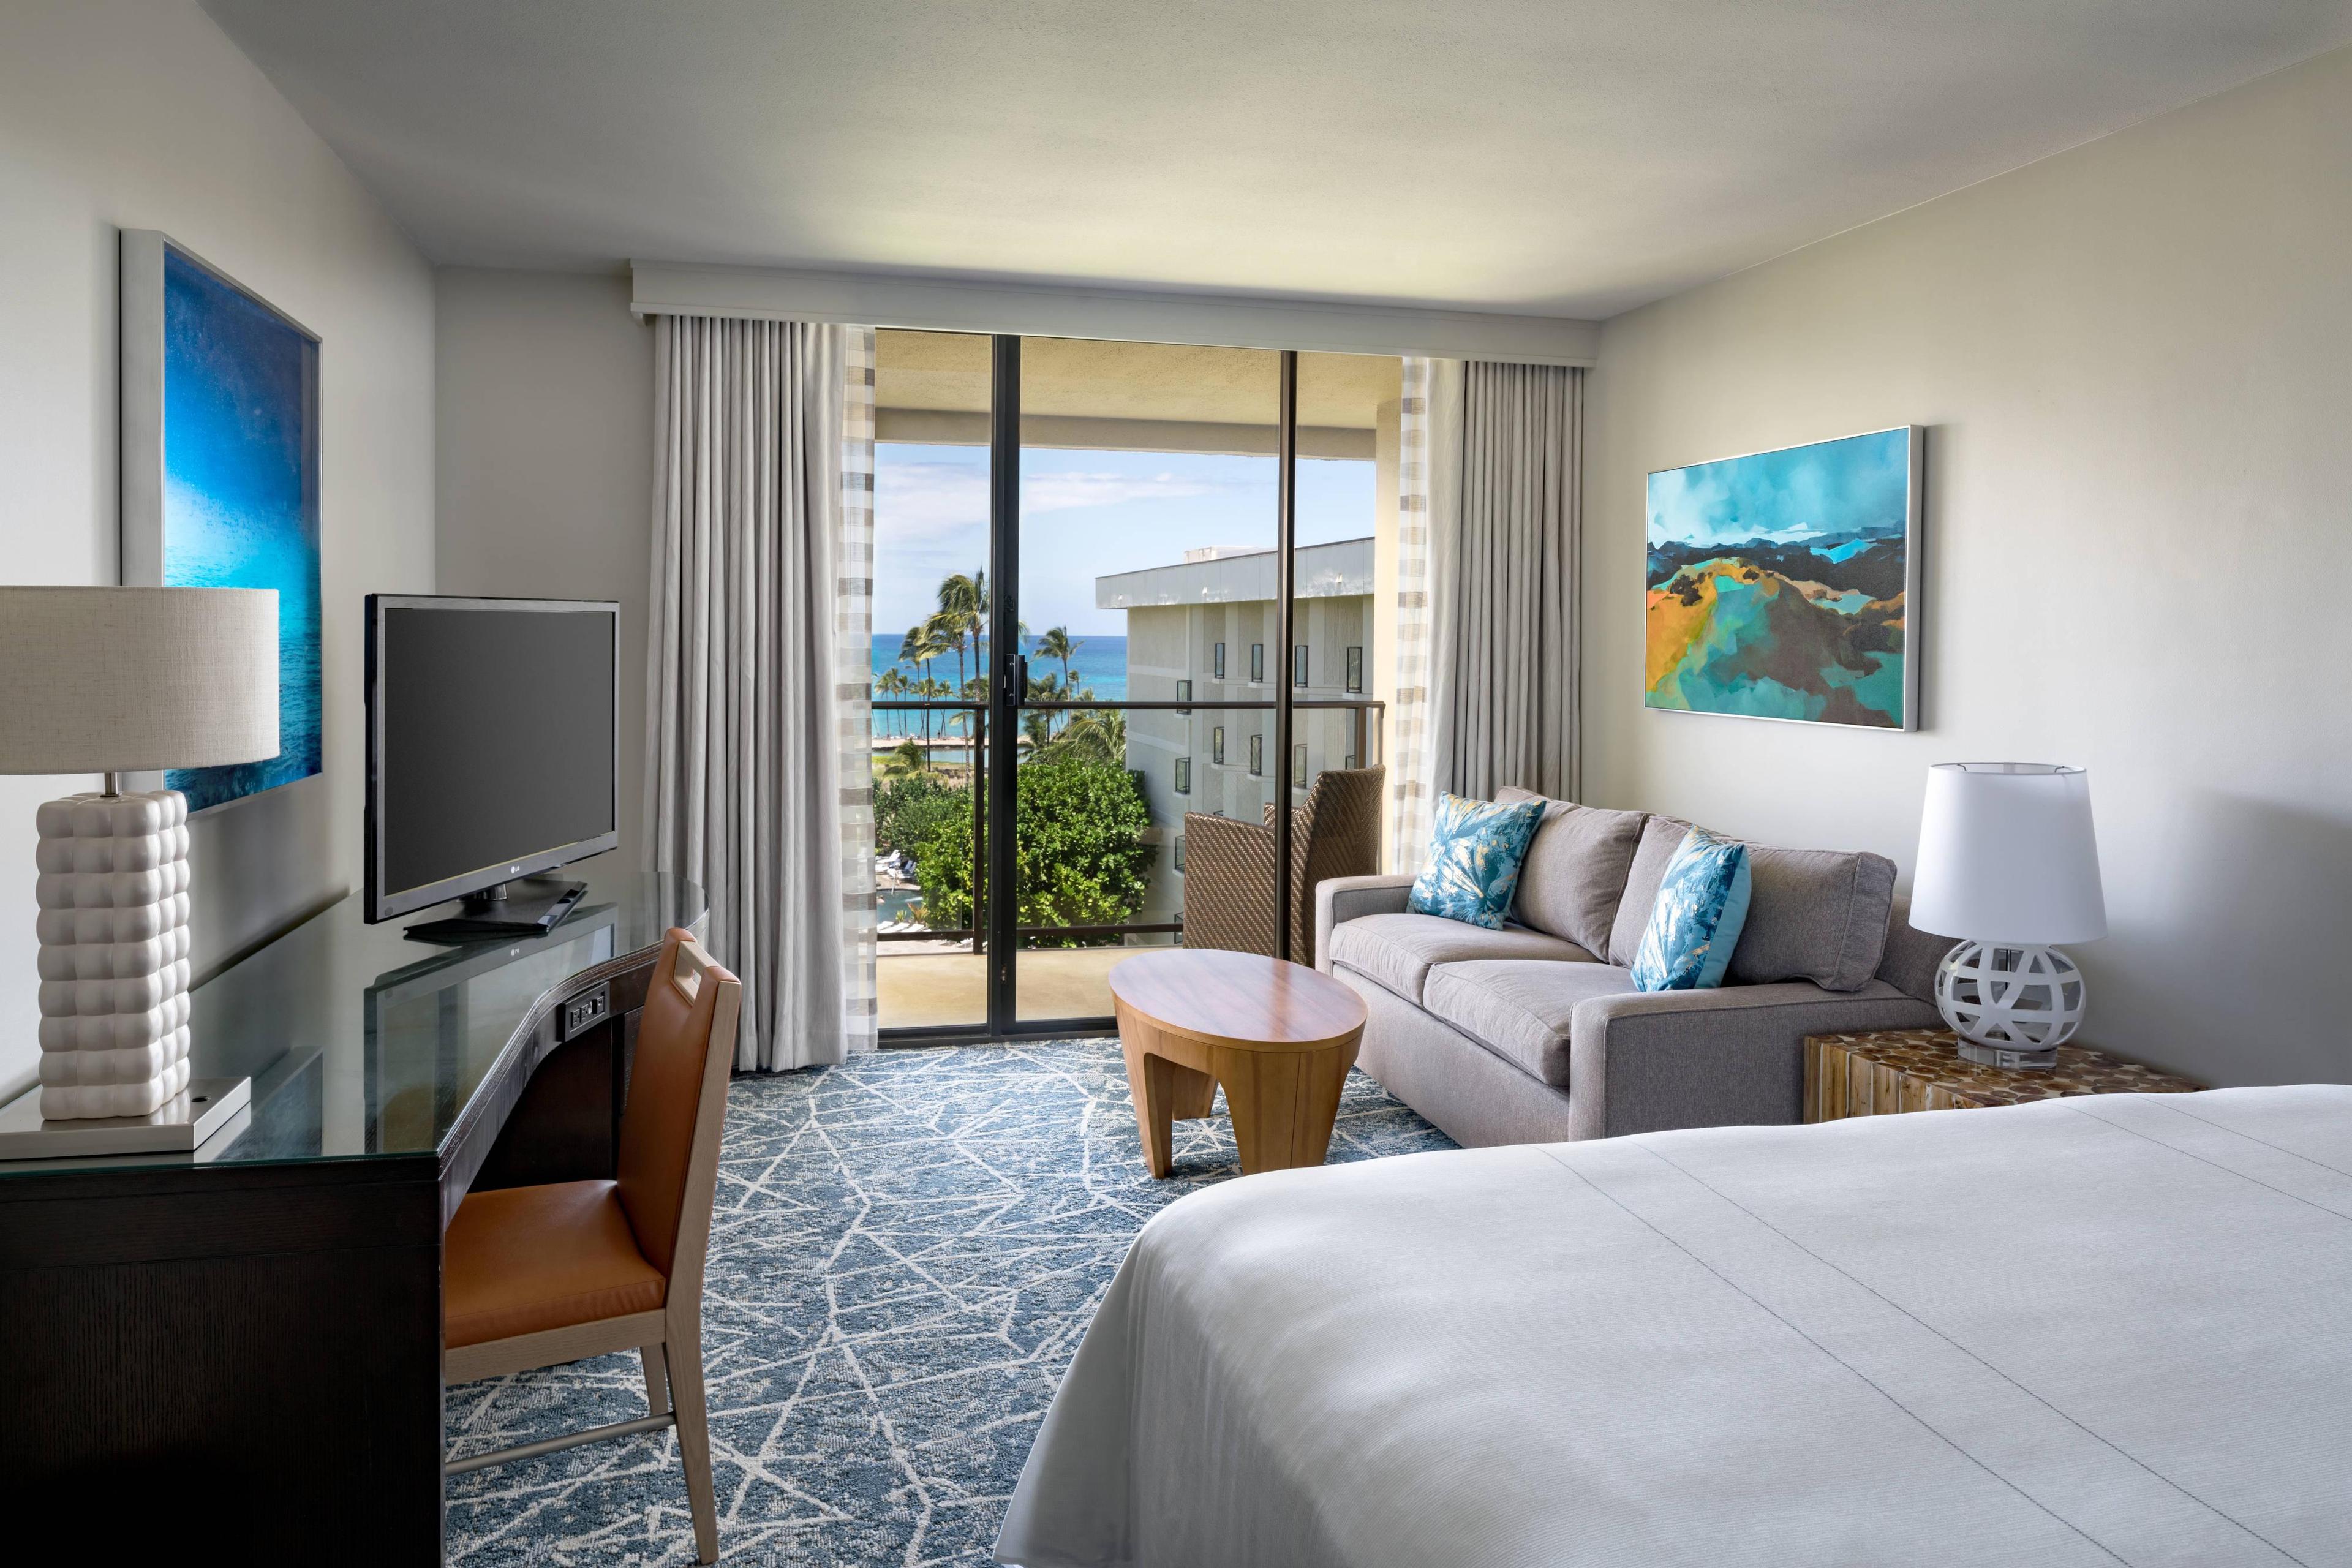 Whether working or lounging, our king room will give you the room you need. Ample work space and a partial view of the ocean offers just the thing.